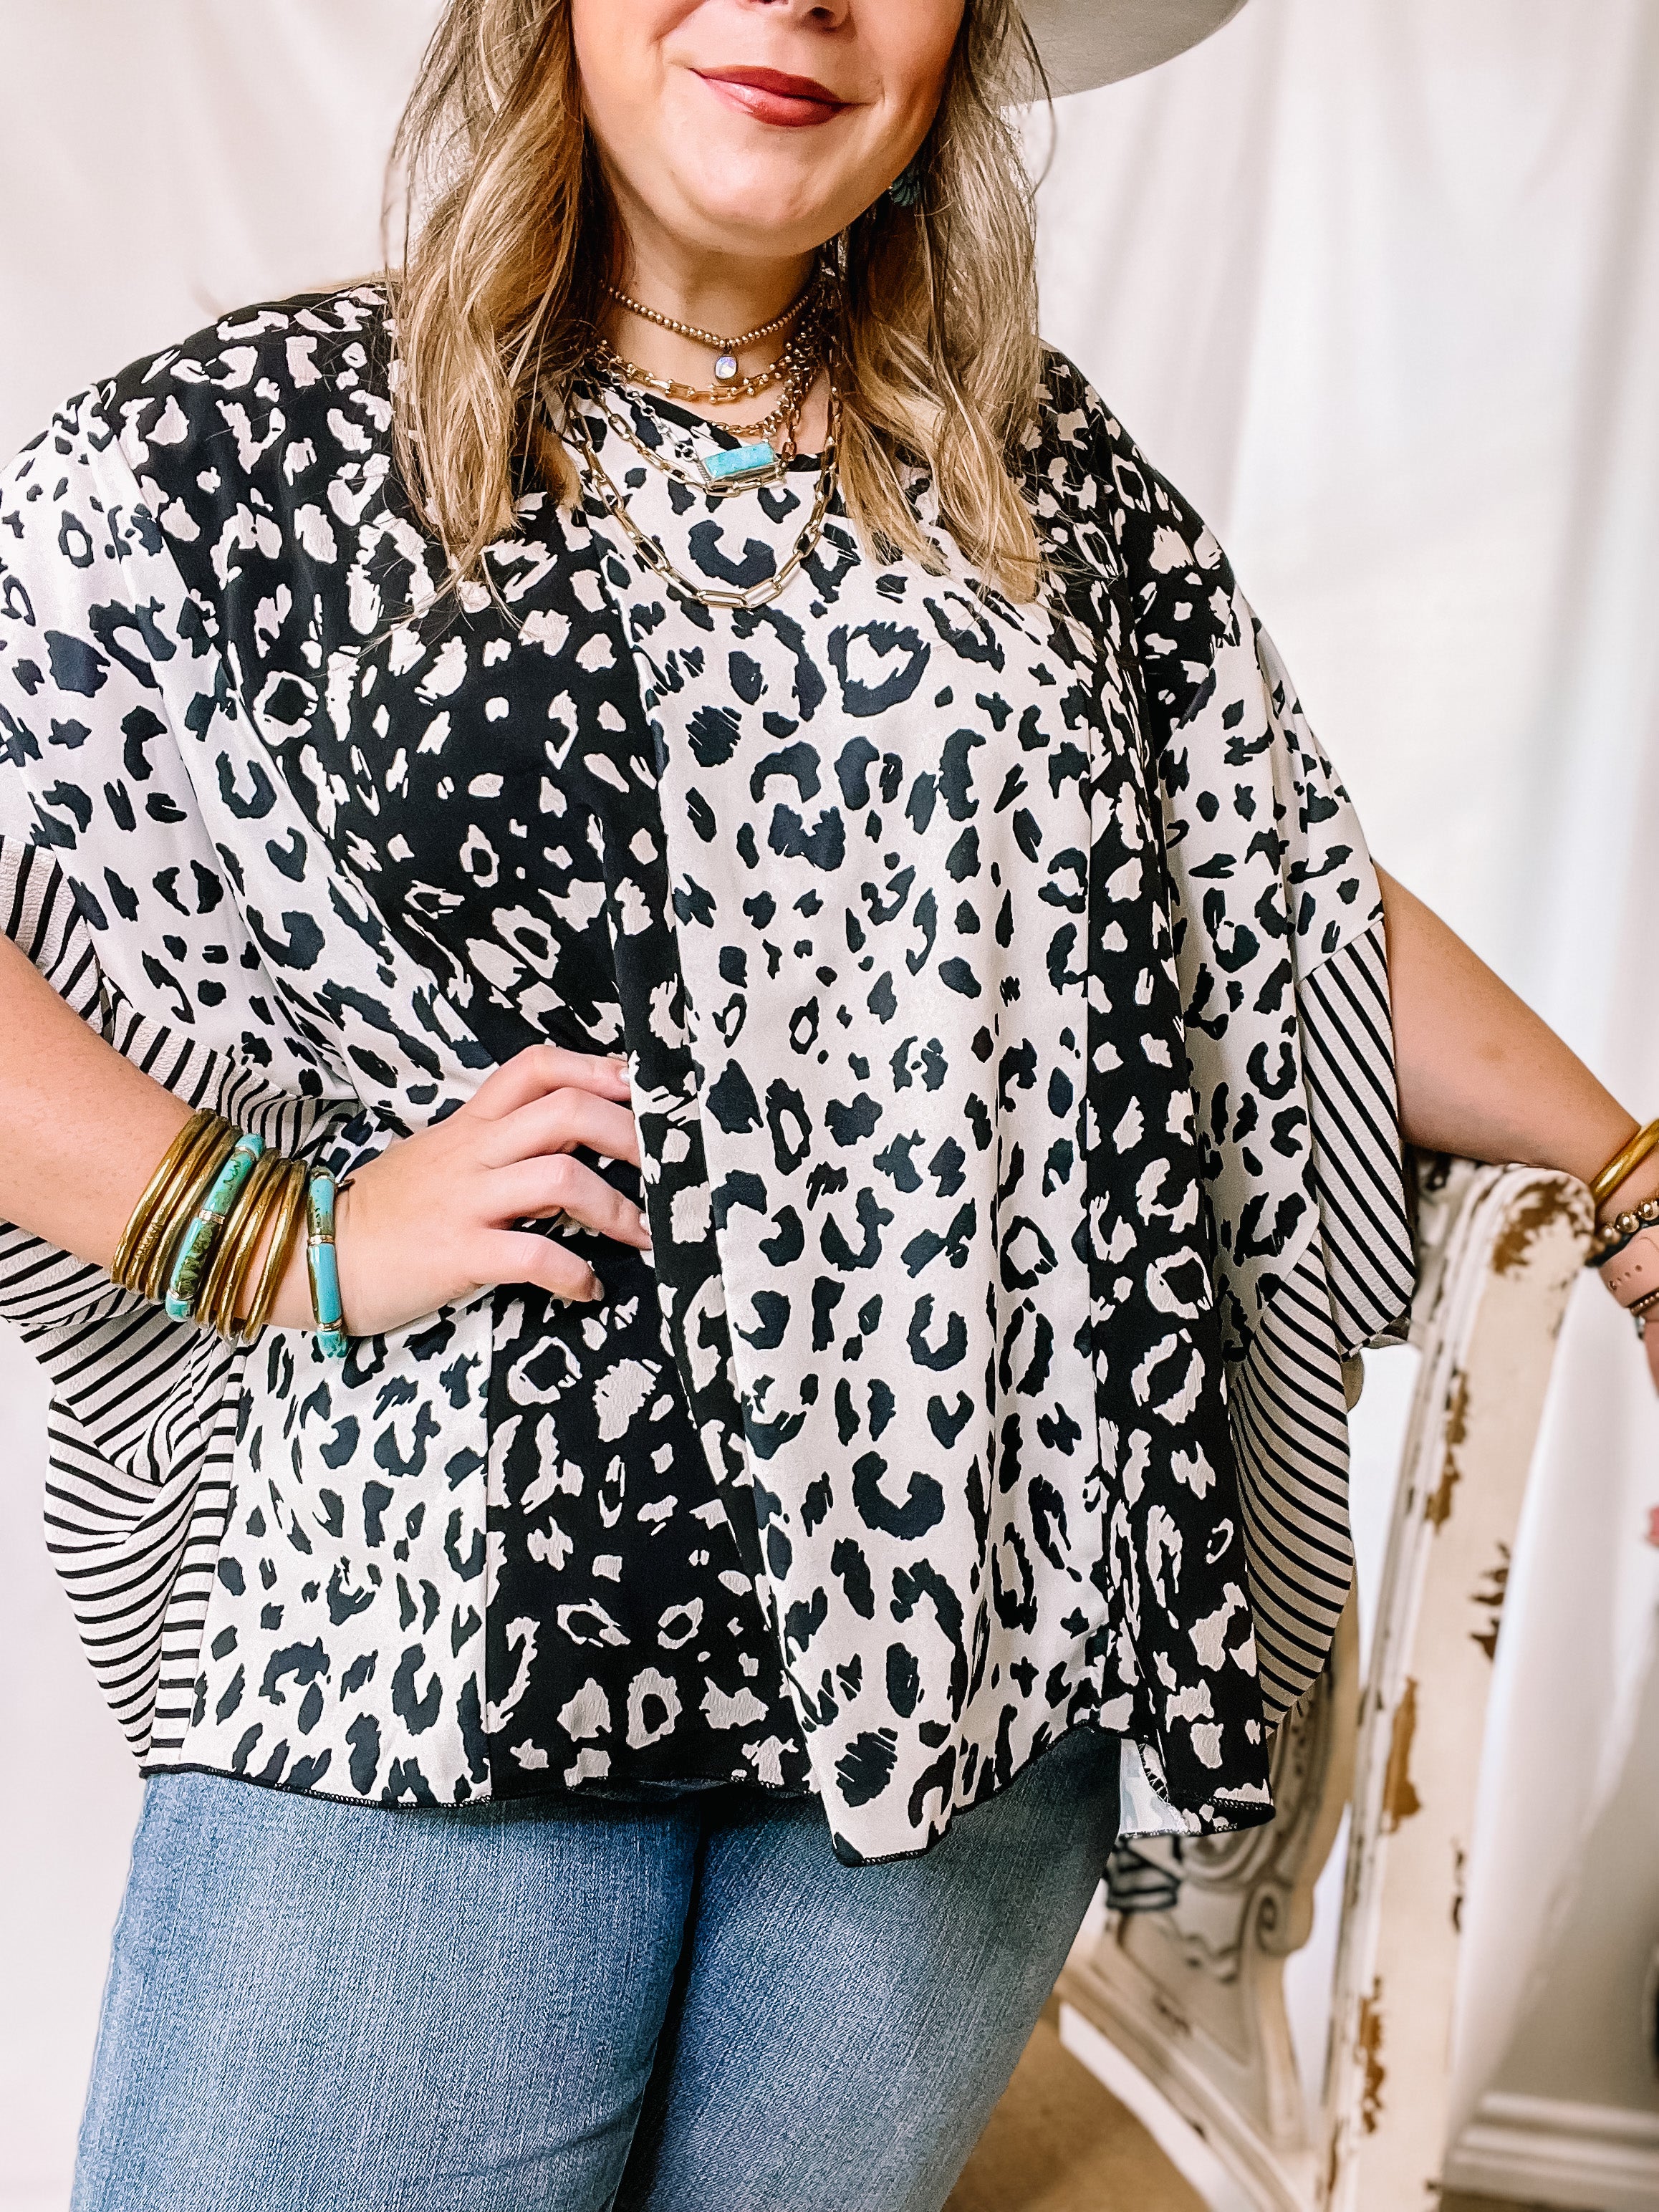 Pursue Your Passion Print Block Poncho Top in Black and White - Giddy Up Glamour Boutique